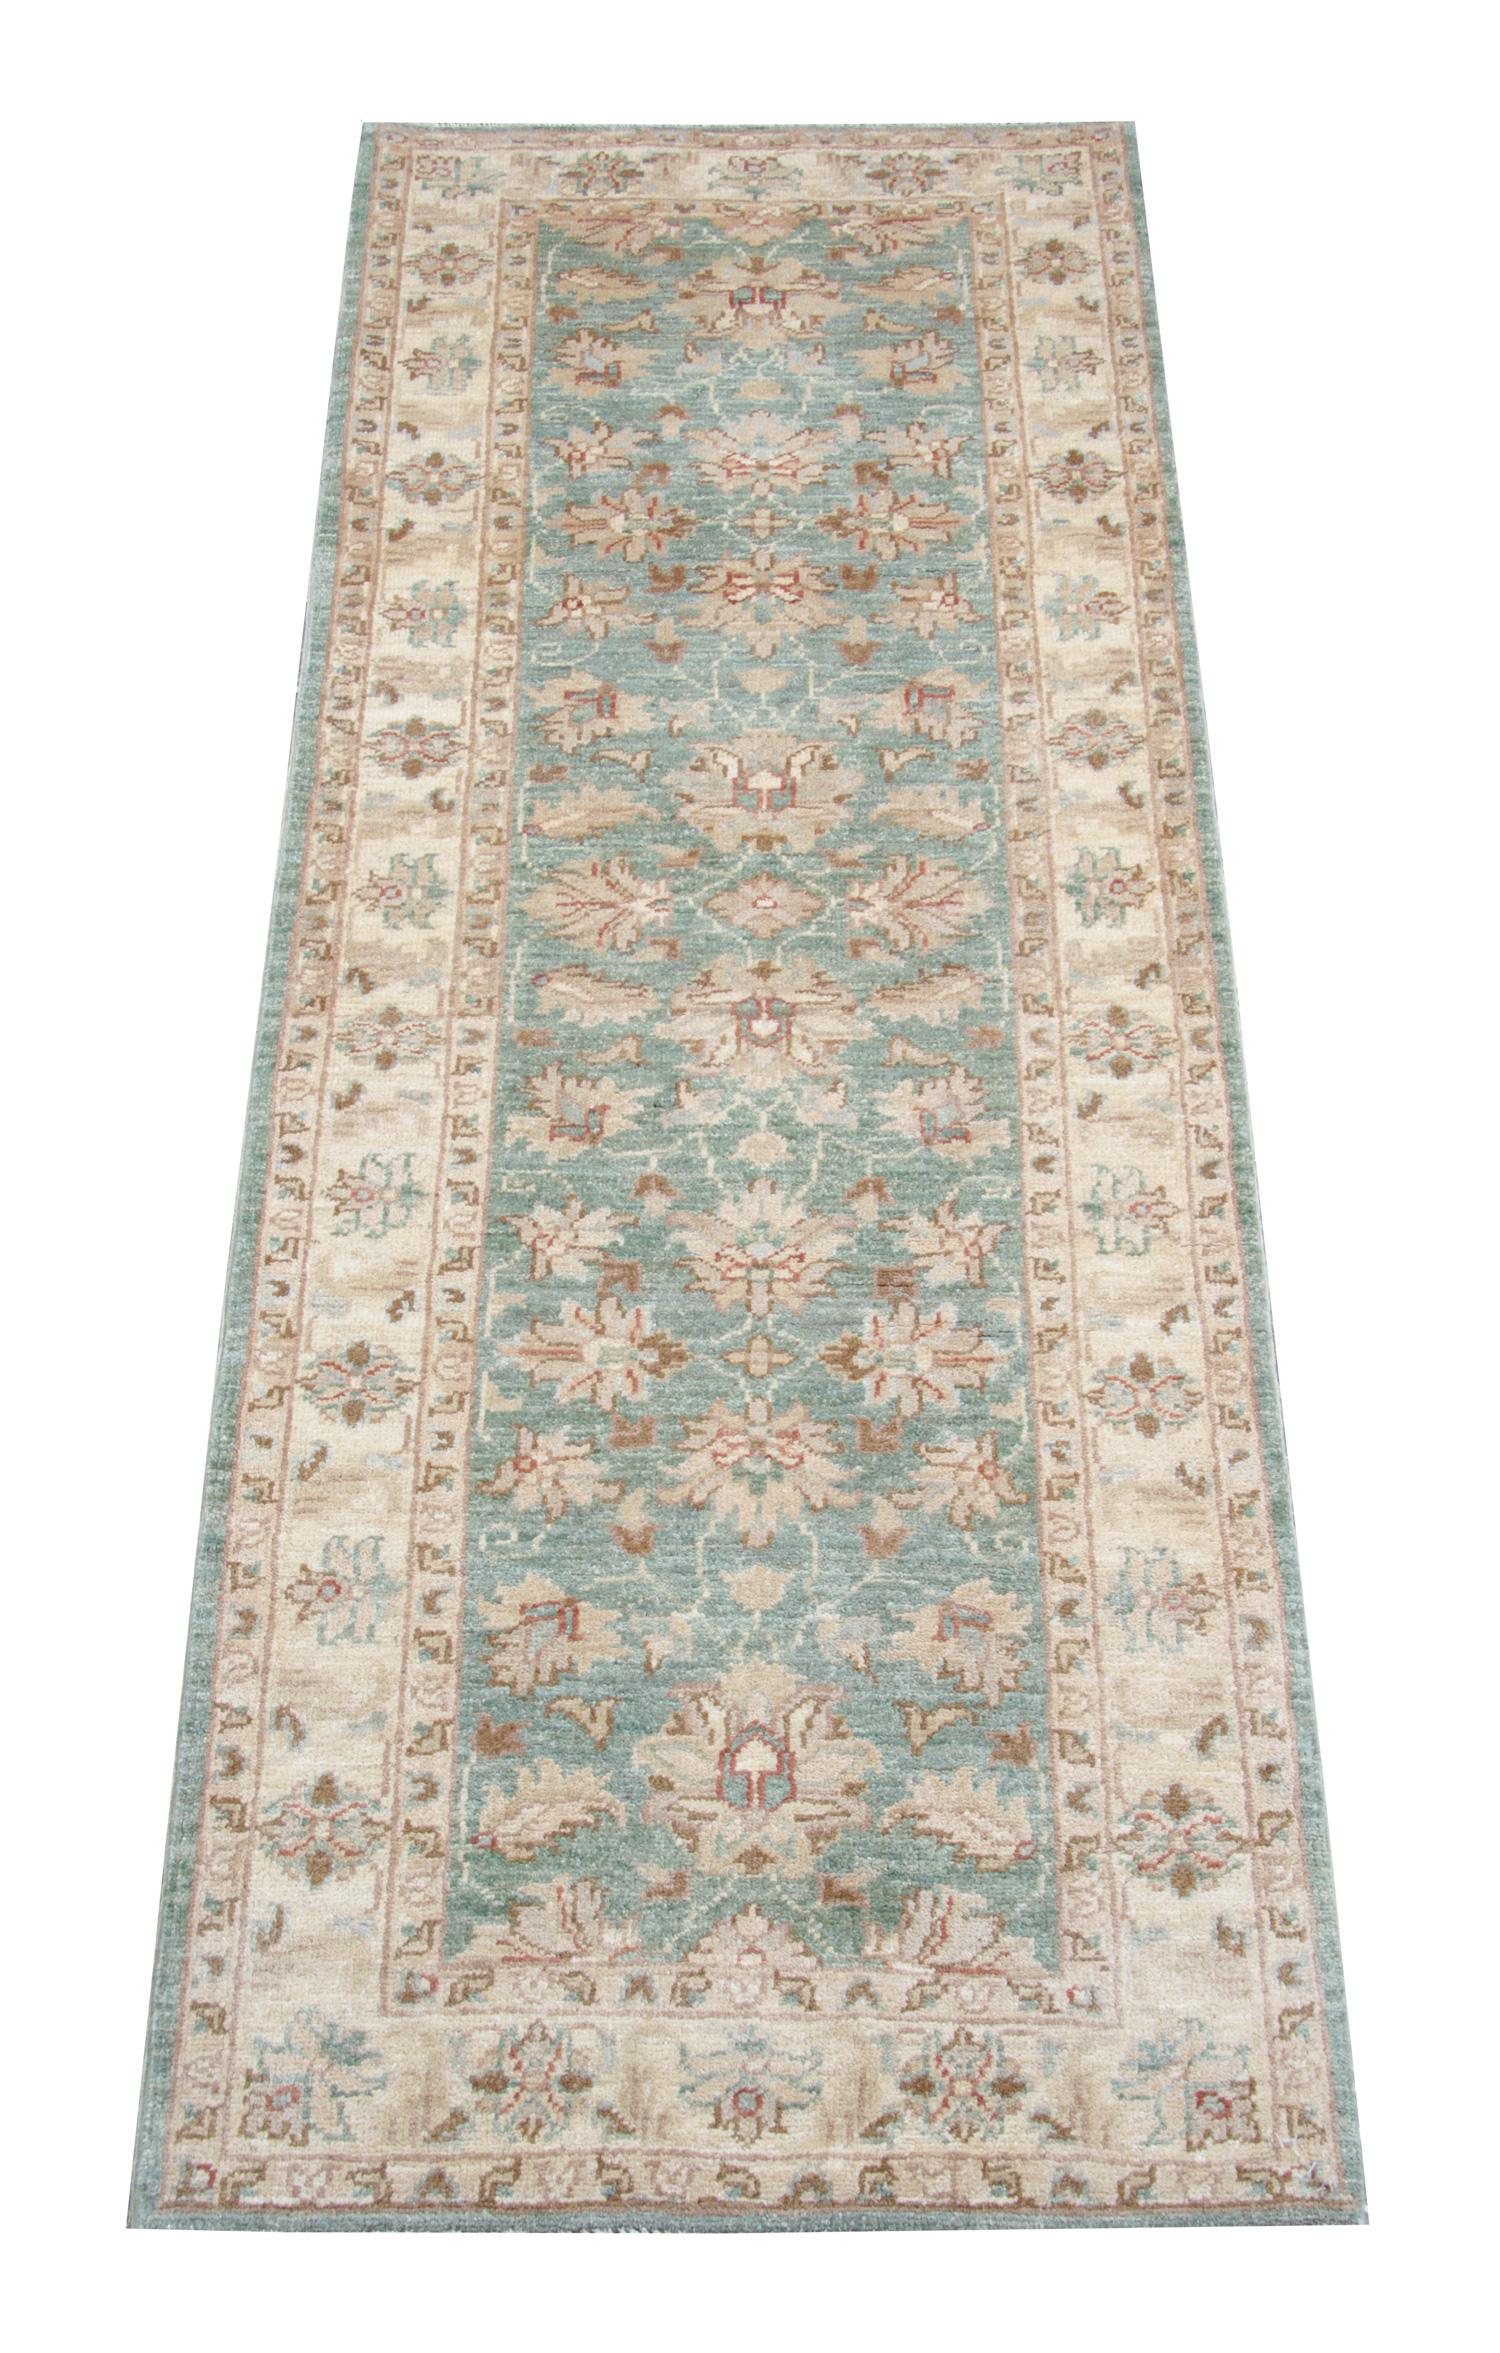 This fine wool Ziegler style runner rug was woven by hand in Pakistan in the late 1990s. The central design features a green background with accents of cream, brown and red accents that make up the symmetrical design. This is then framed by a